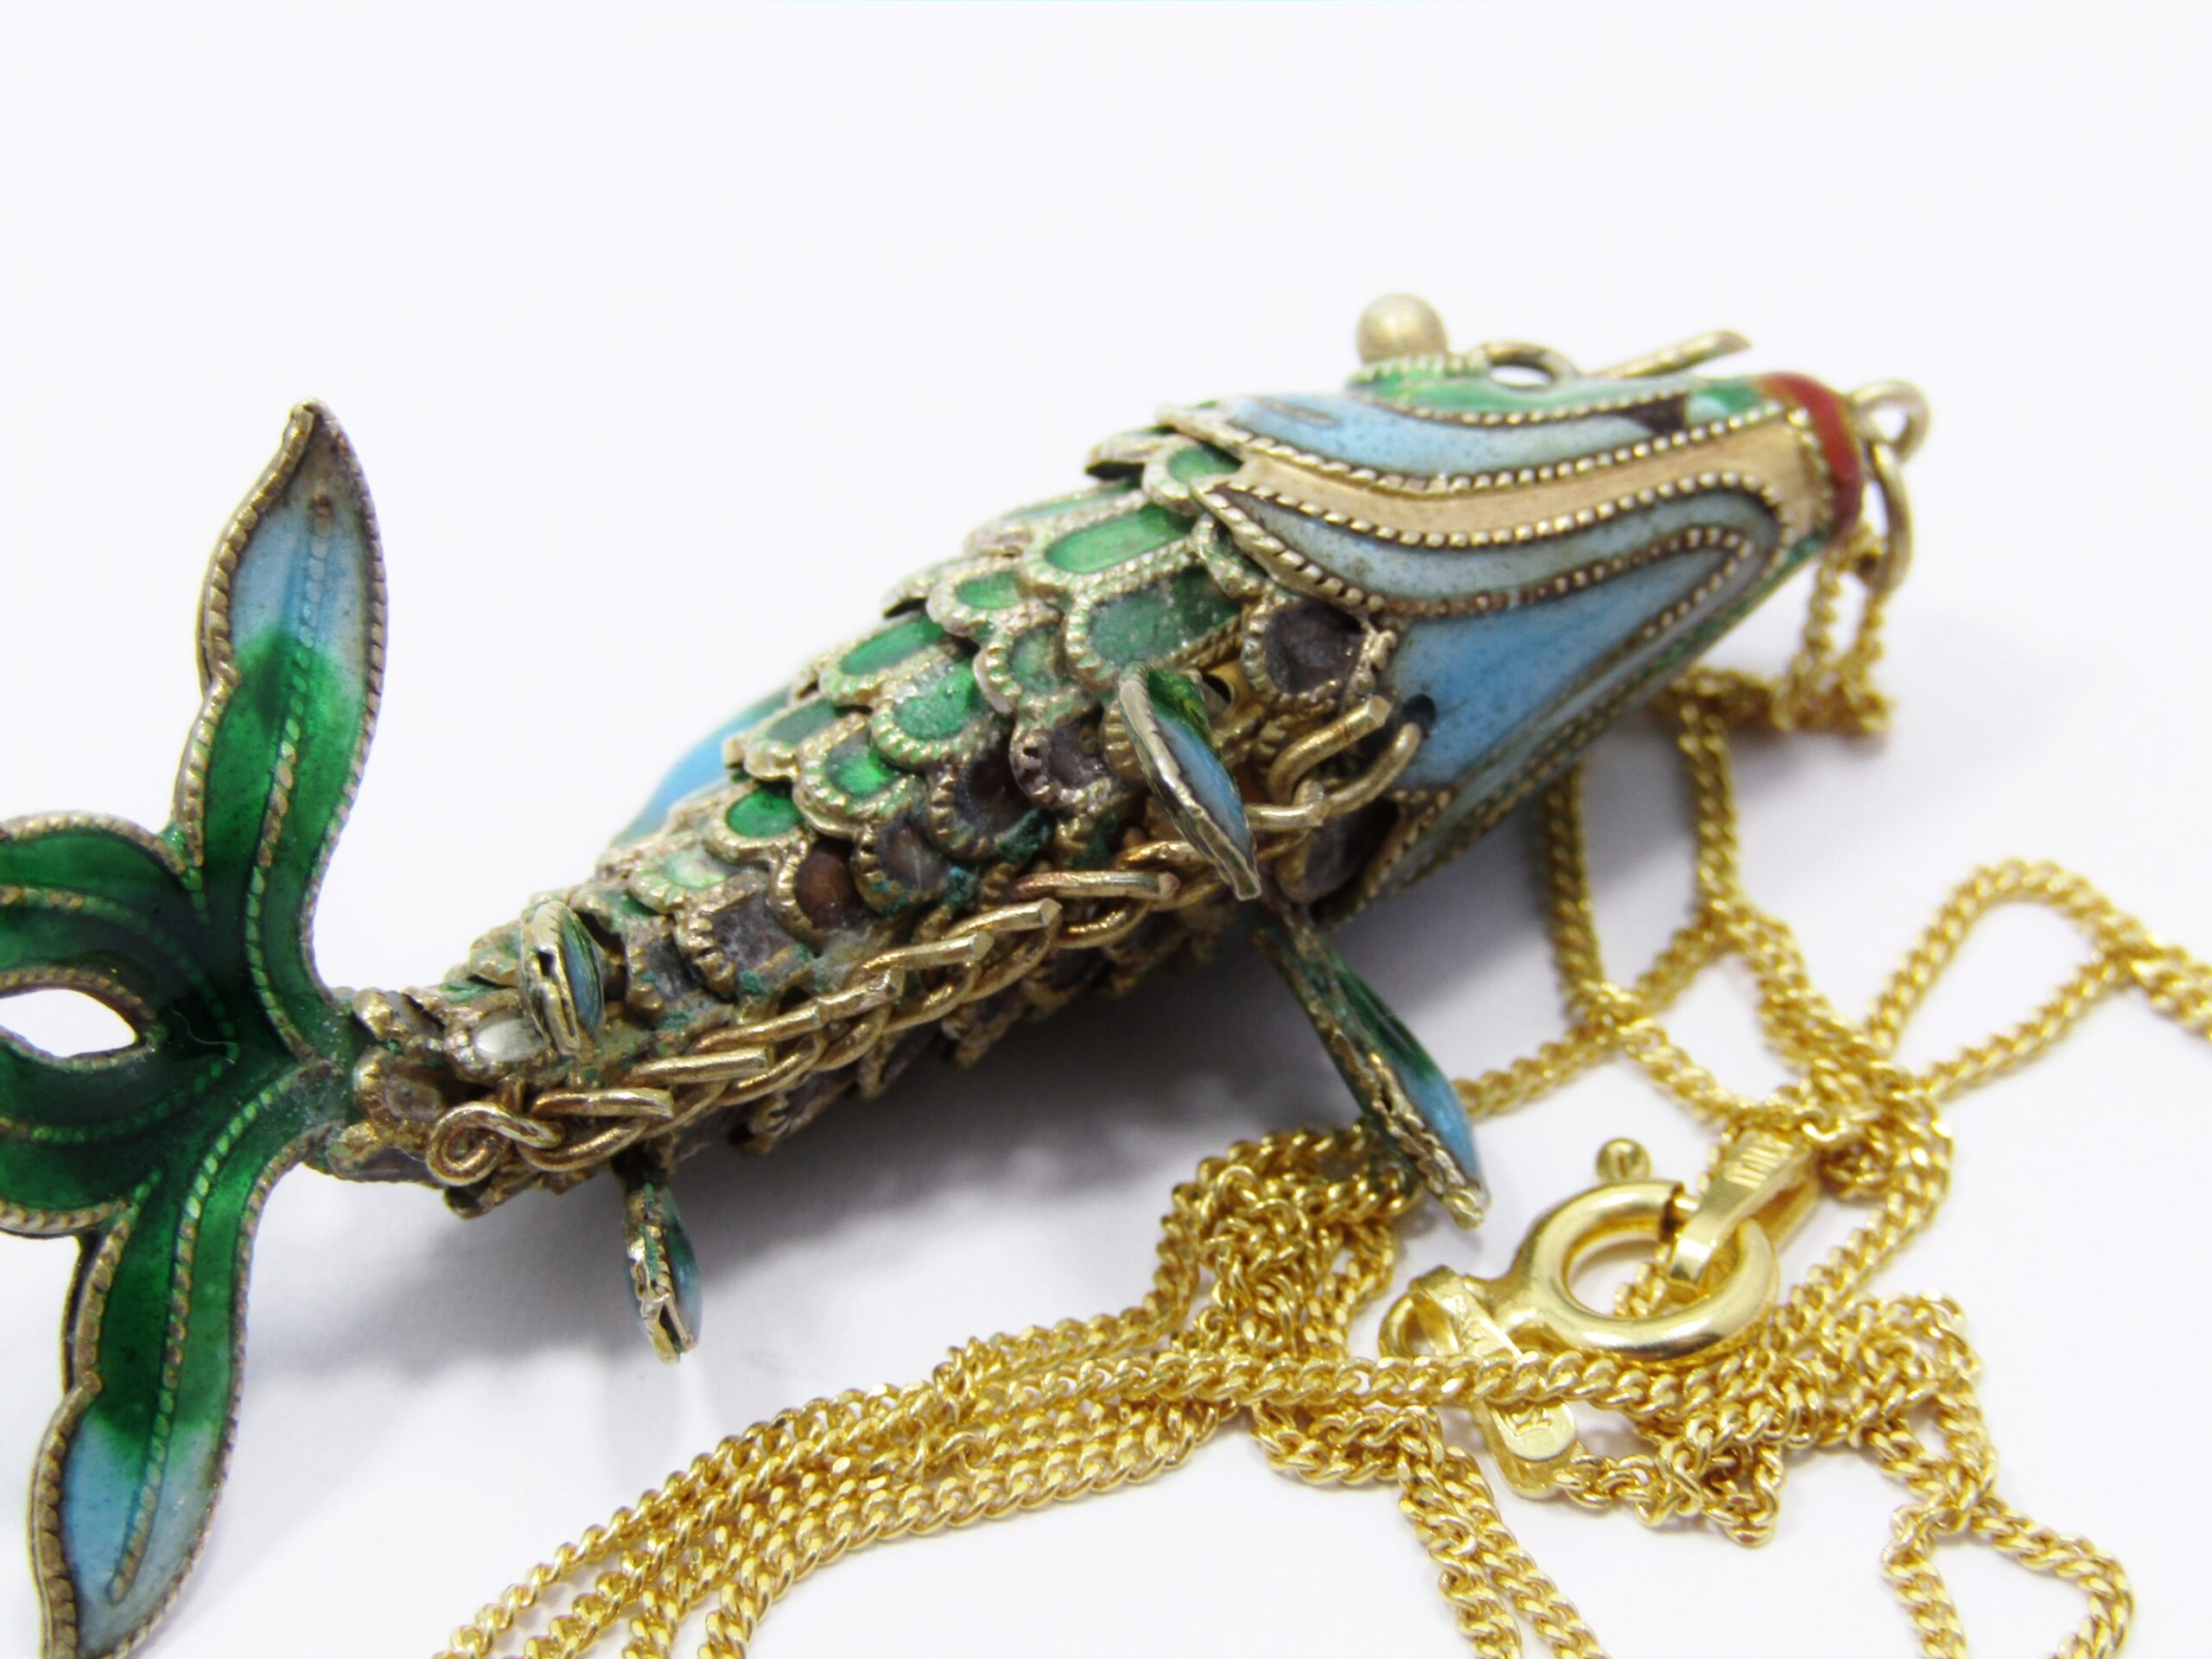 A Stunning Medium Size Gold Gilt Articulated Fish Pendant over Sterling Silver